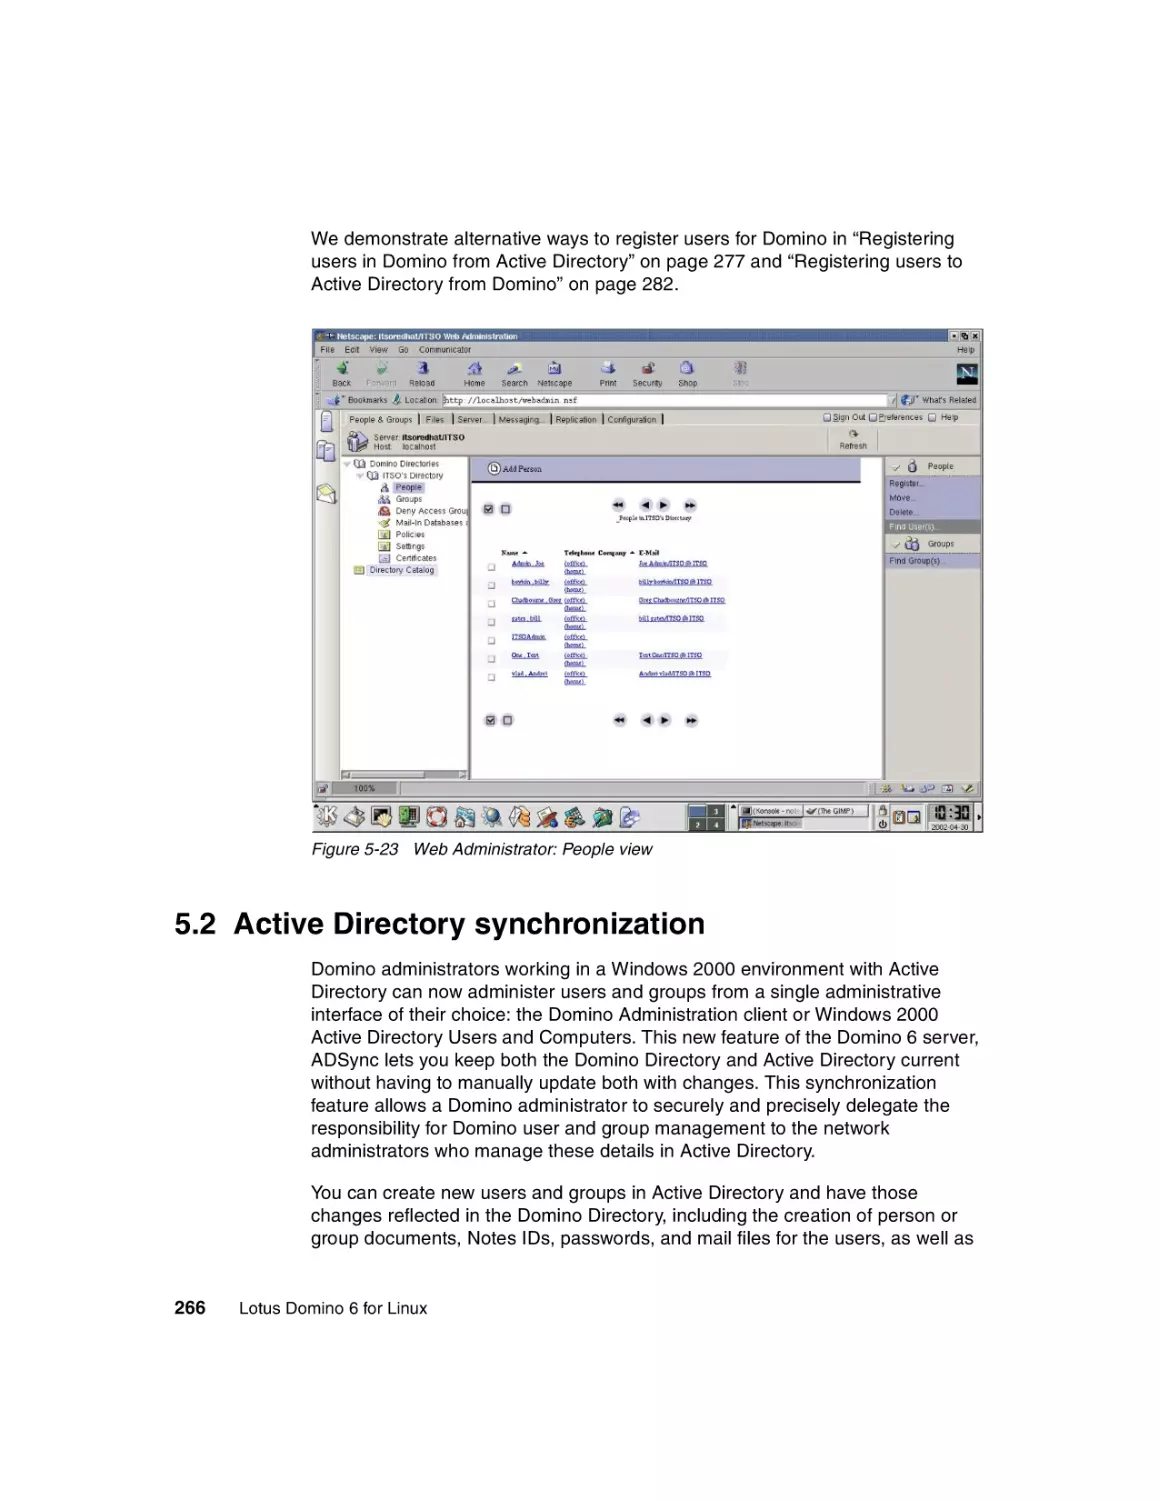 5.2 Active Directory synchronization